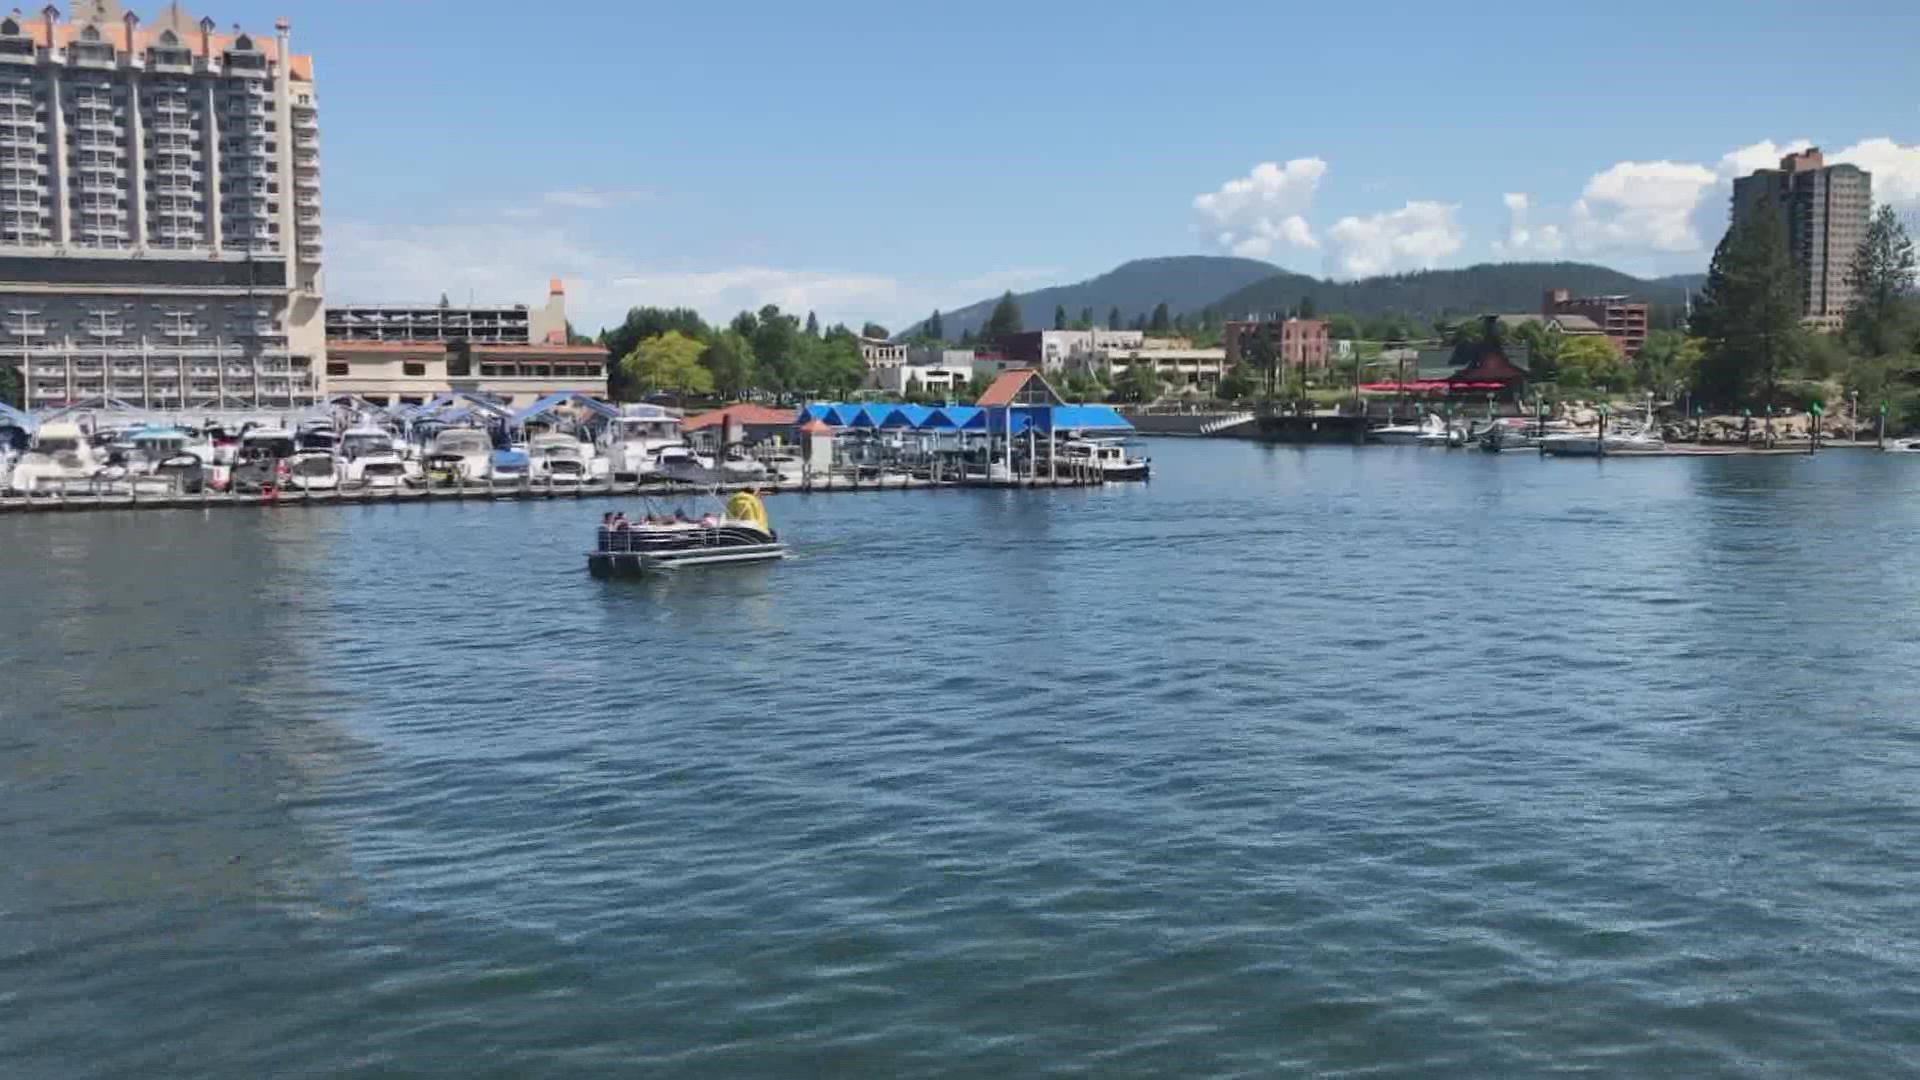 Captain Carl Fus says the Coeur D’ Alene Cruises are seeing an increase in gas prices at the pump.